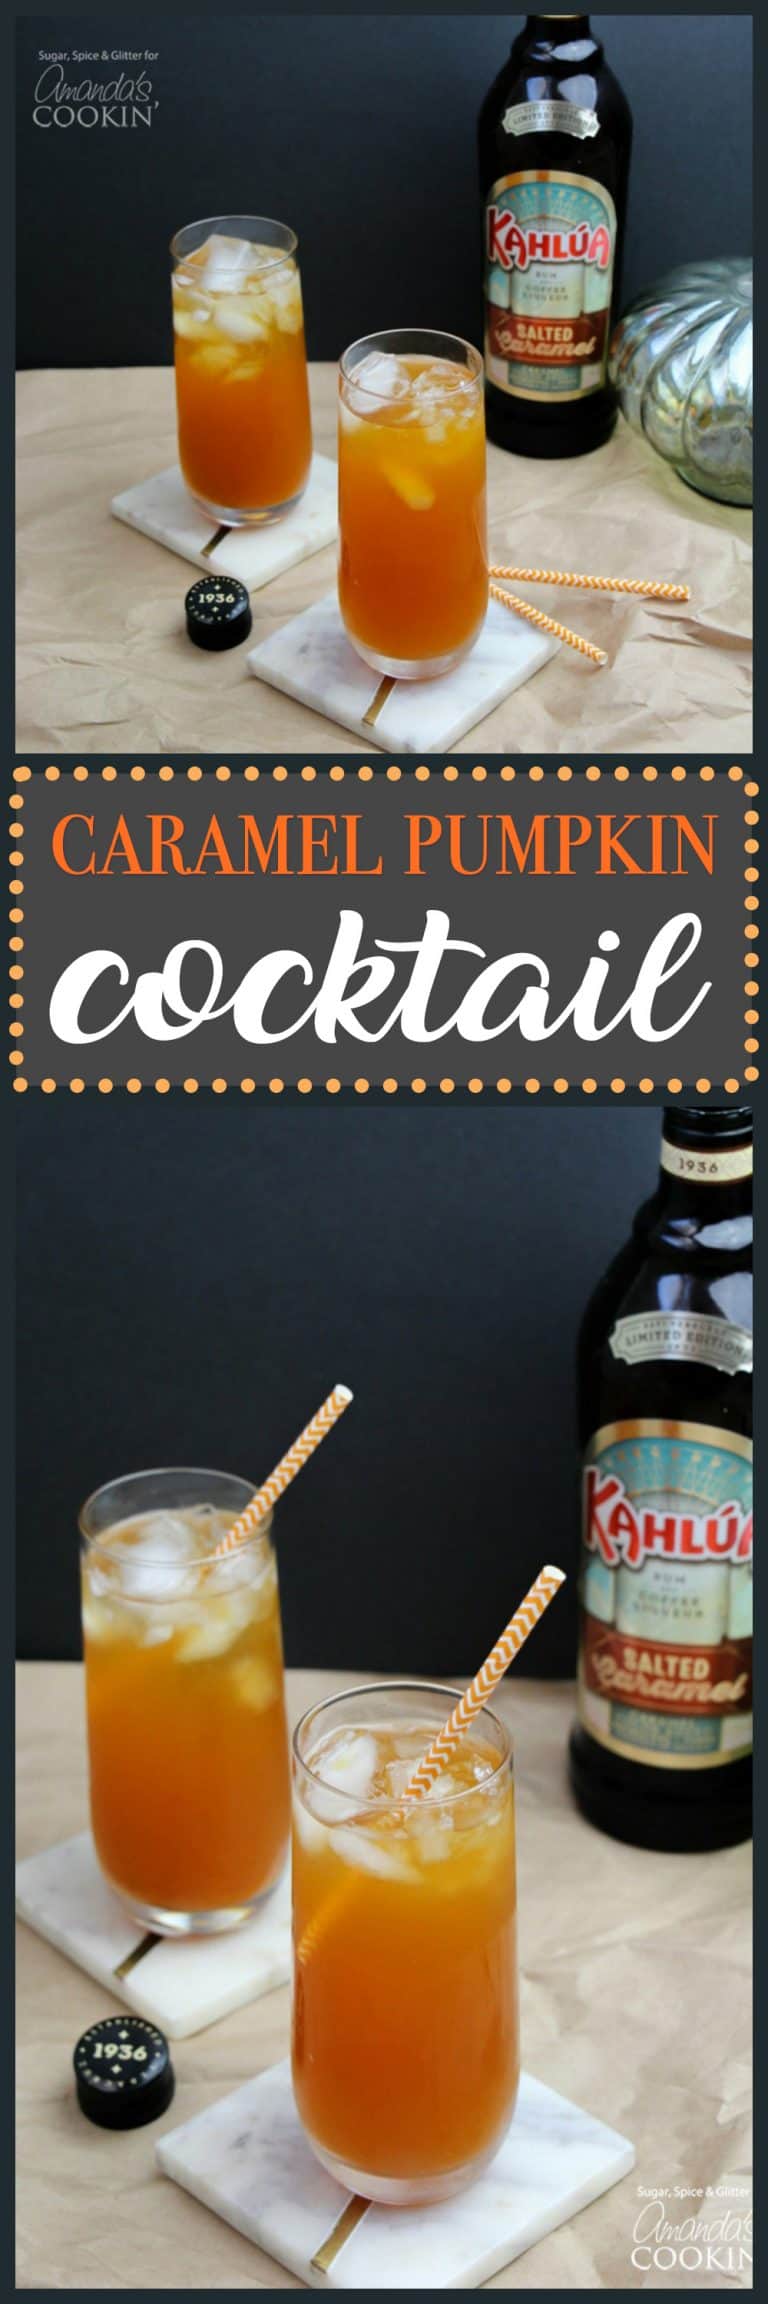 Pumpkin Cocktail with Caramel: an unexpected yet delicious cocktail!